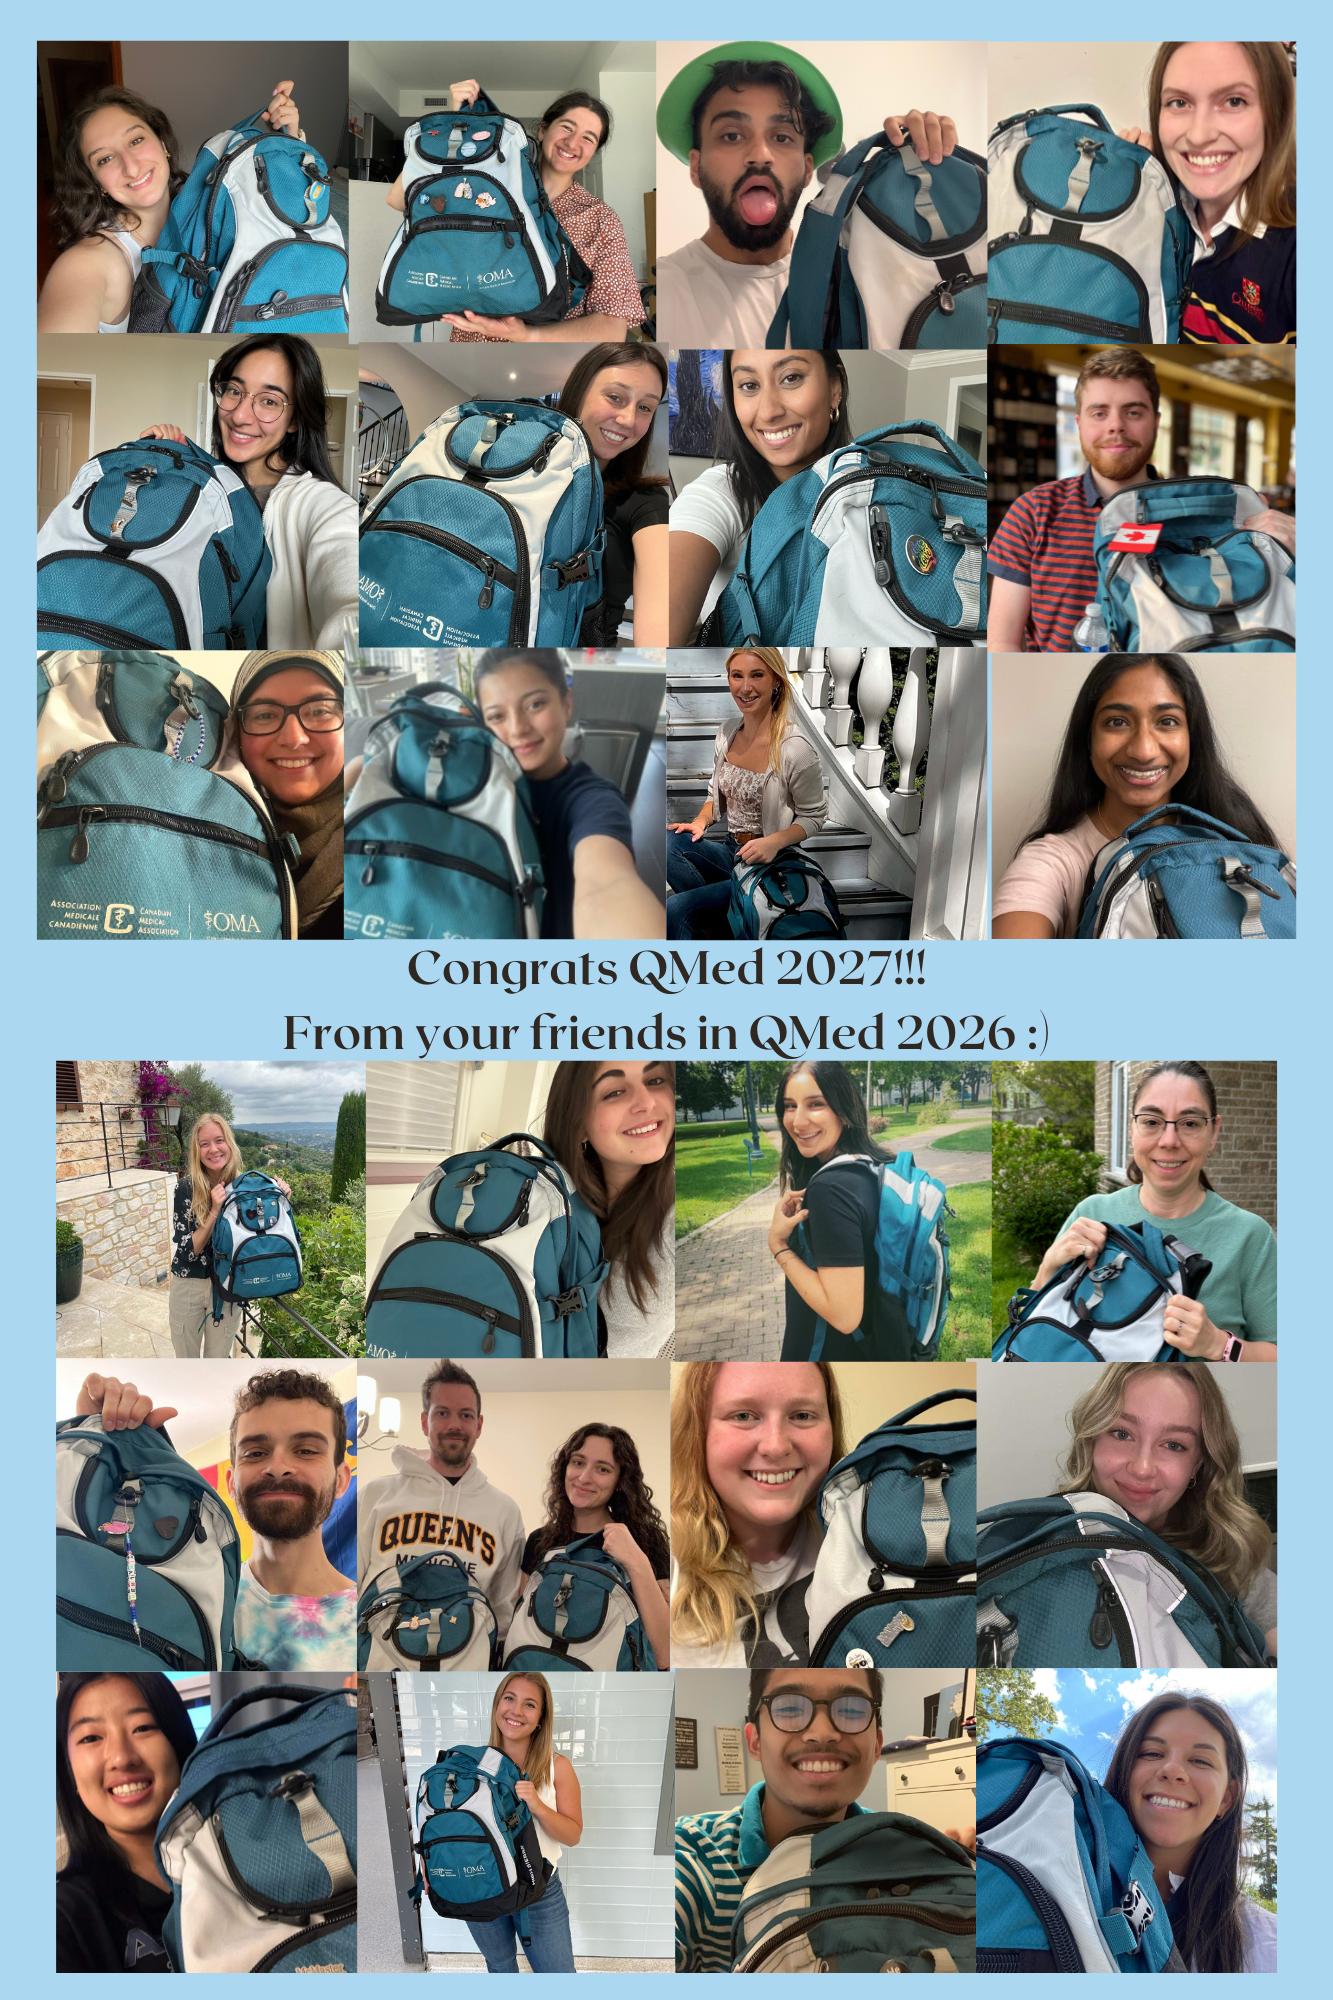 Congrats+QMed+2027%21+From+your+friends+in+QMed+2026.png